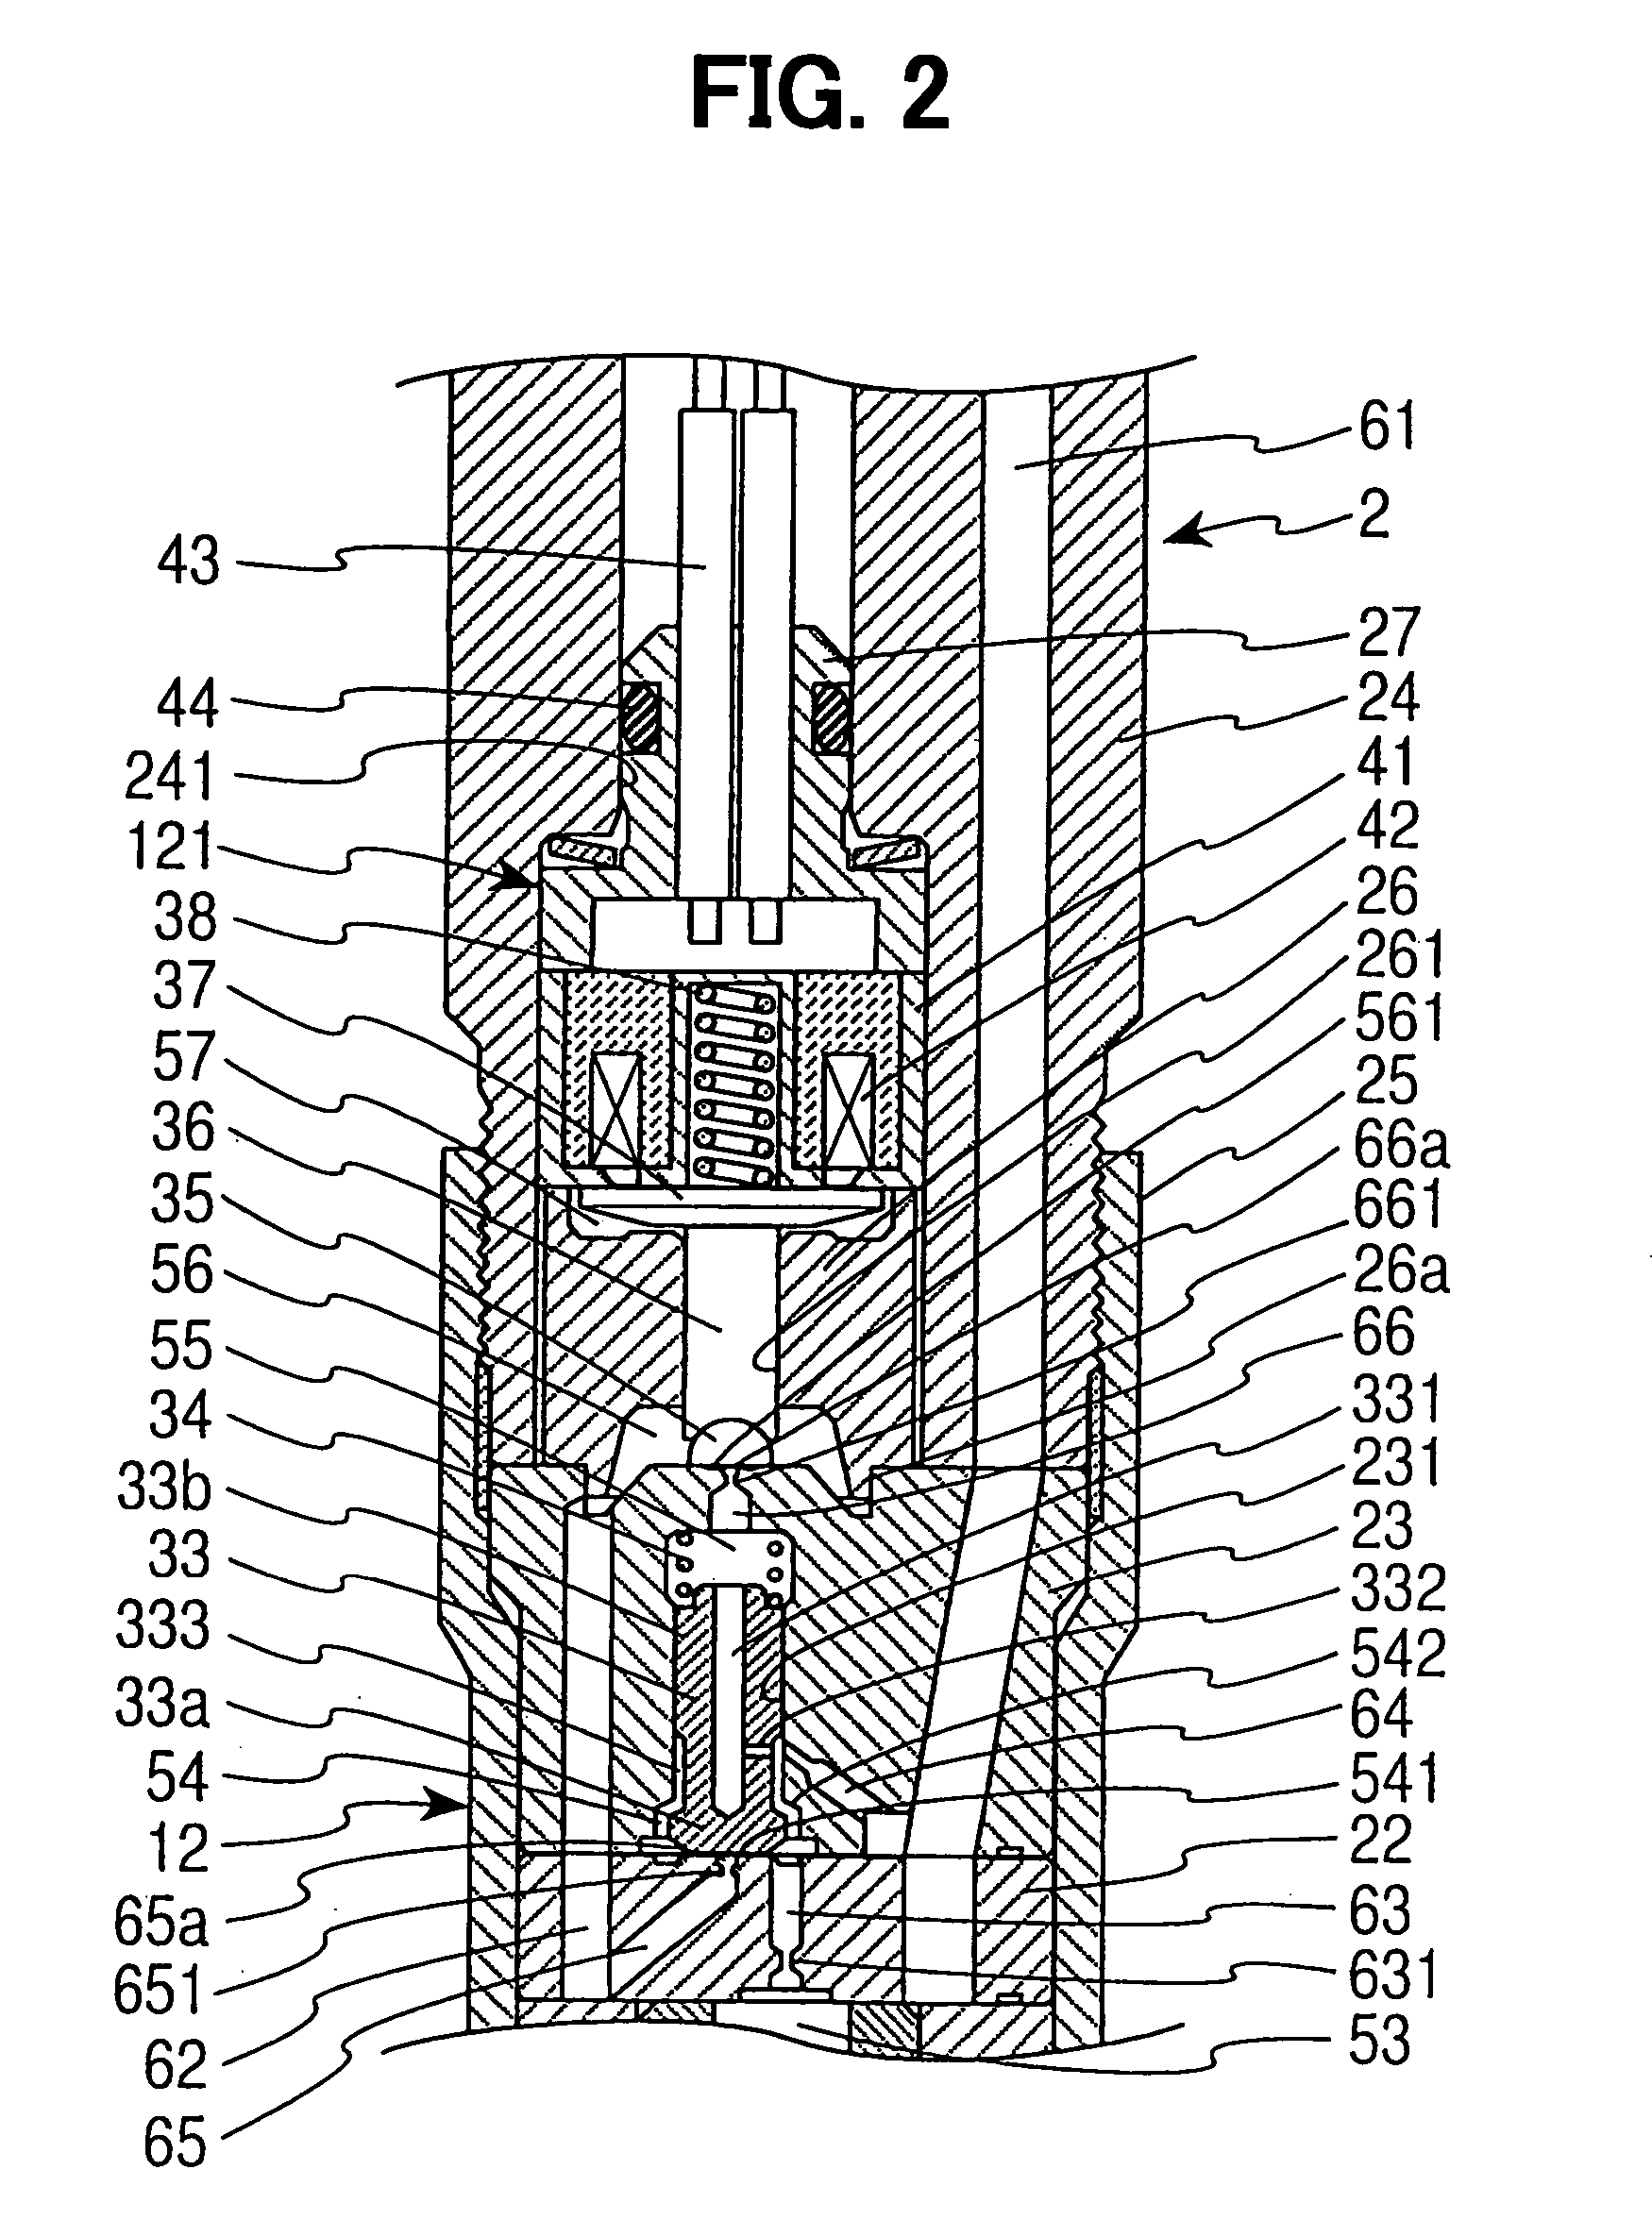 Injector having structure for controlling nozzle needle